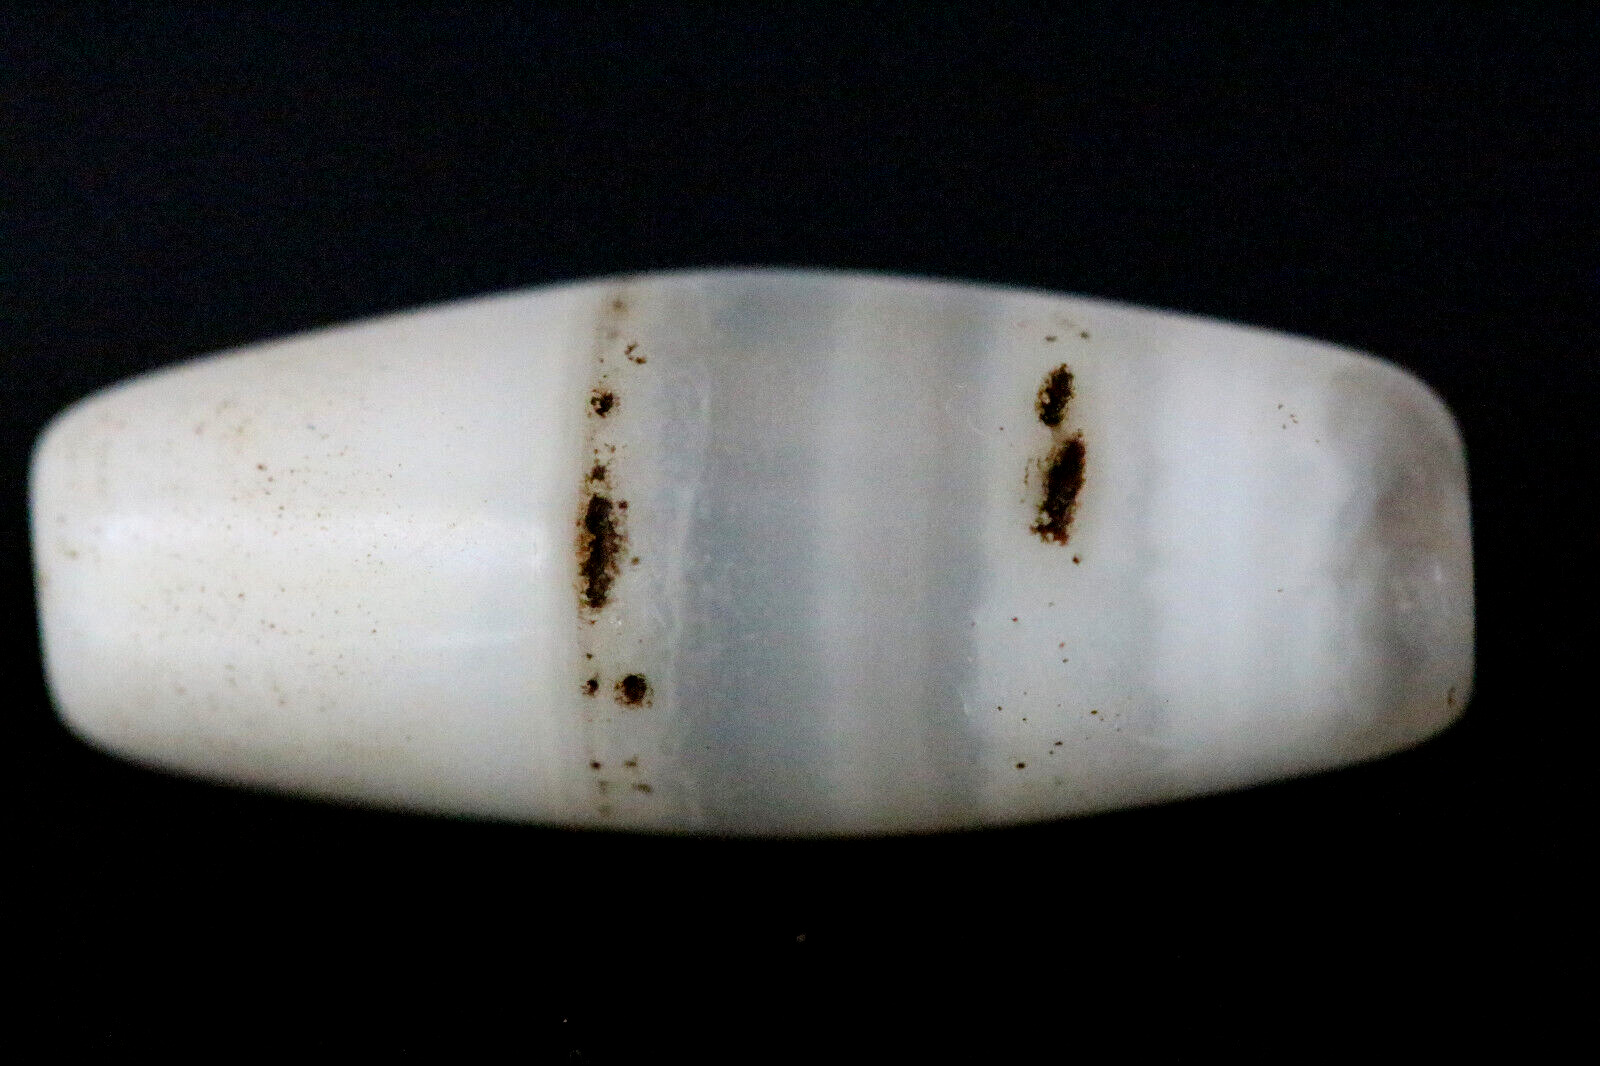 Exquisite Bactrian Ancient Dzi Banded Bead- Est 1500+ Y/O Chalcedony Bead 30 mm